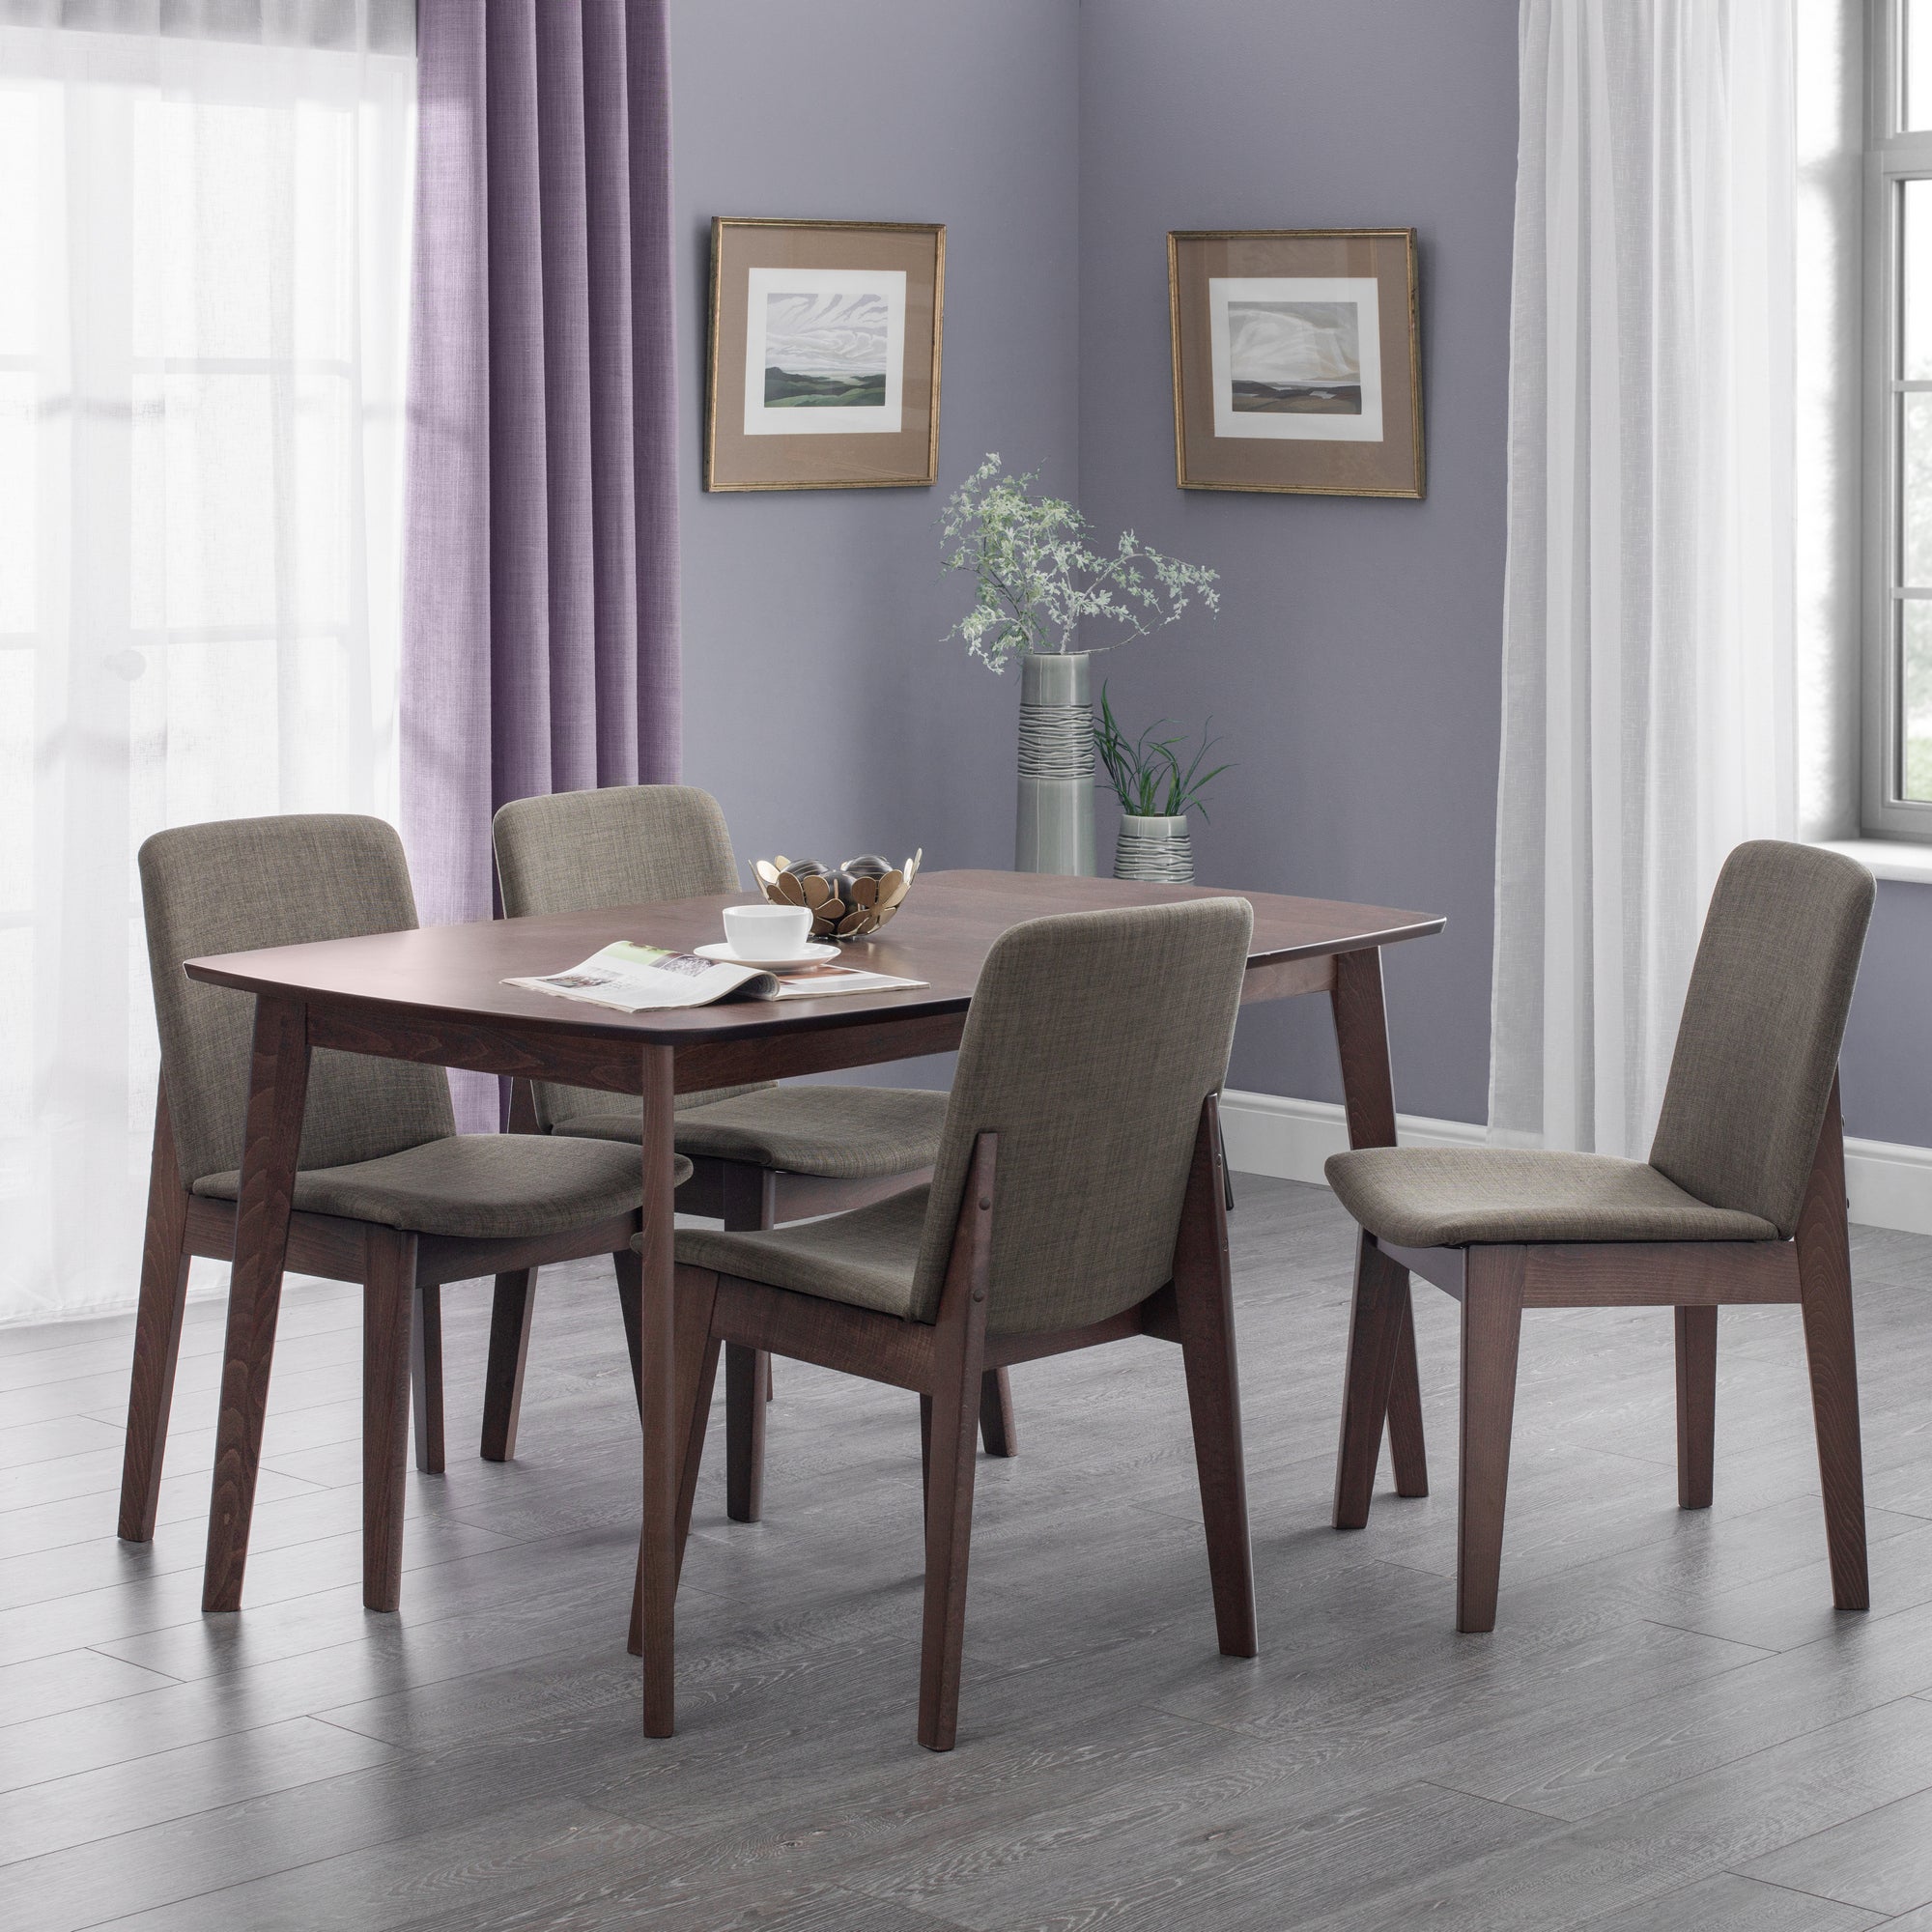 Kensington Rectangular Extendable Dining Table With 4 Chairs Beech Wood Brown